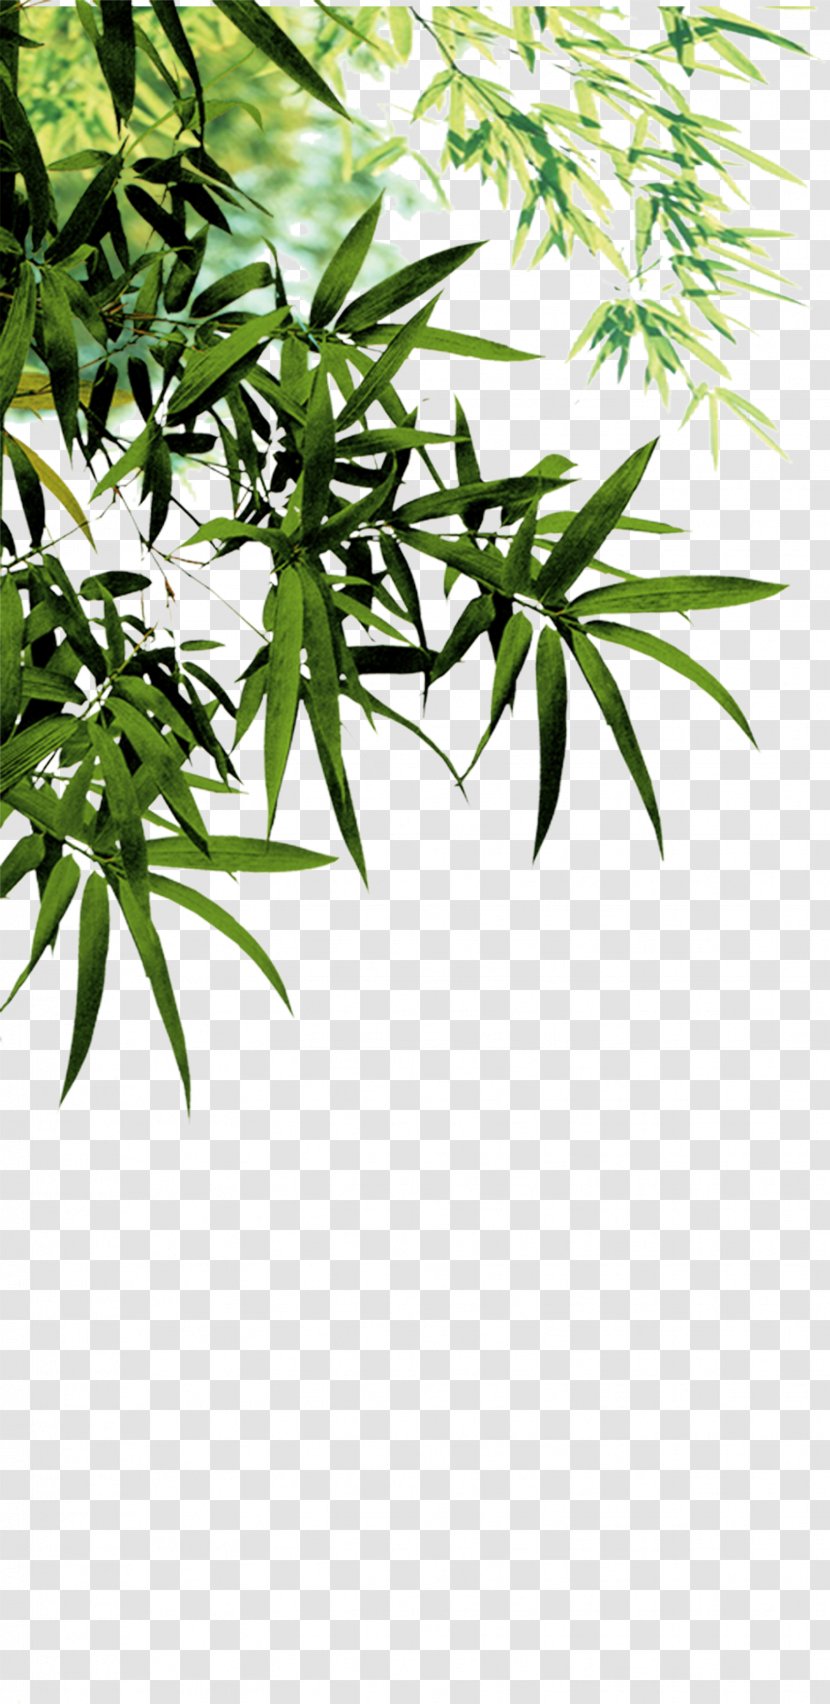 Anji County Bamboo Charcoal Software - Flowerpot - Leaves Transparent PNG